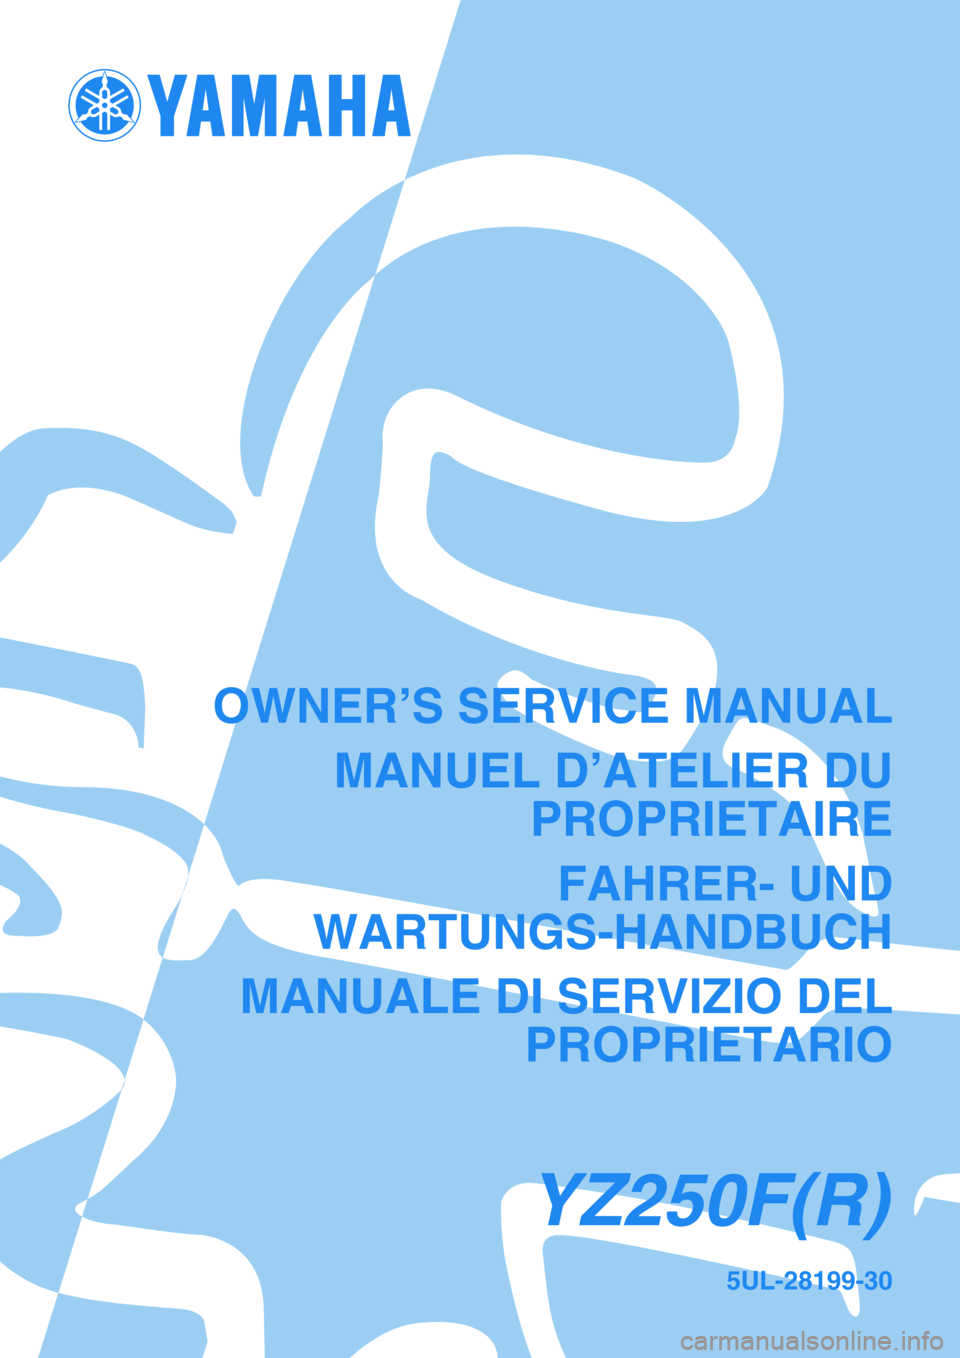 YAMAHA YZ250F 2003  Owners Manual 5UL-28199-30
YZ250F(R)
OWNER’S SERVICE MANUAL
MANUEL D’ATELIER DU
PROPRIETAIRE
FAHRER- UND
WARTUNGS-HANDBUCH
MANUALE DI SERVIZIO DEL
PROPRIETARIO 